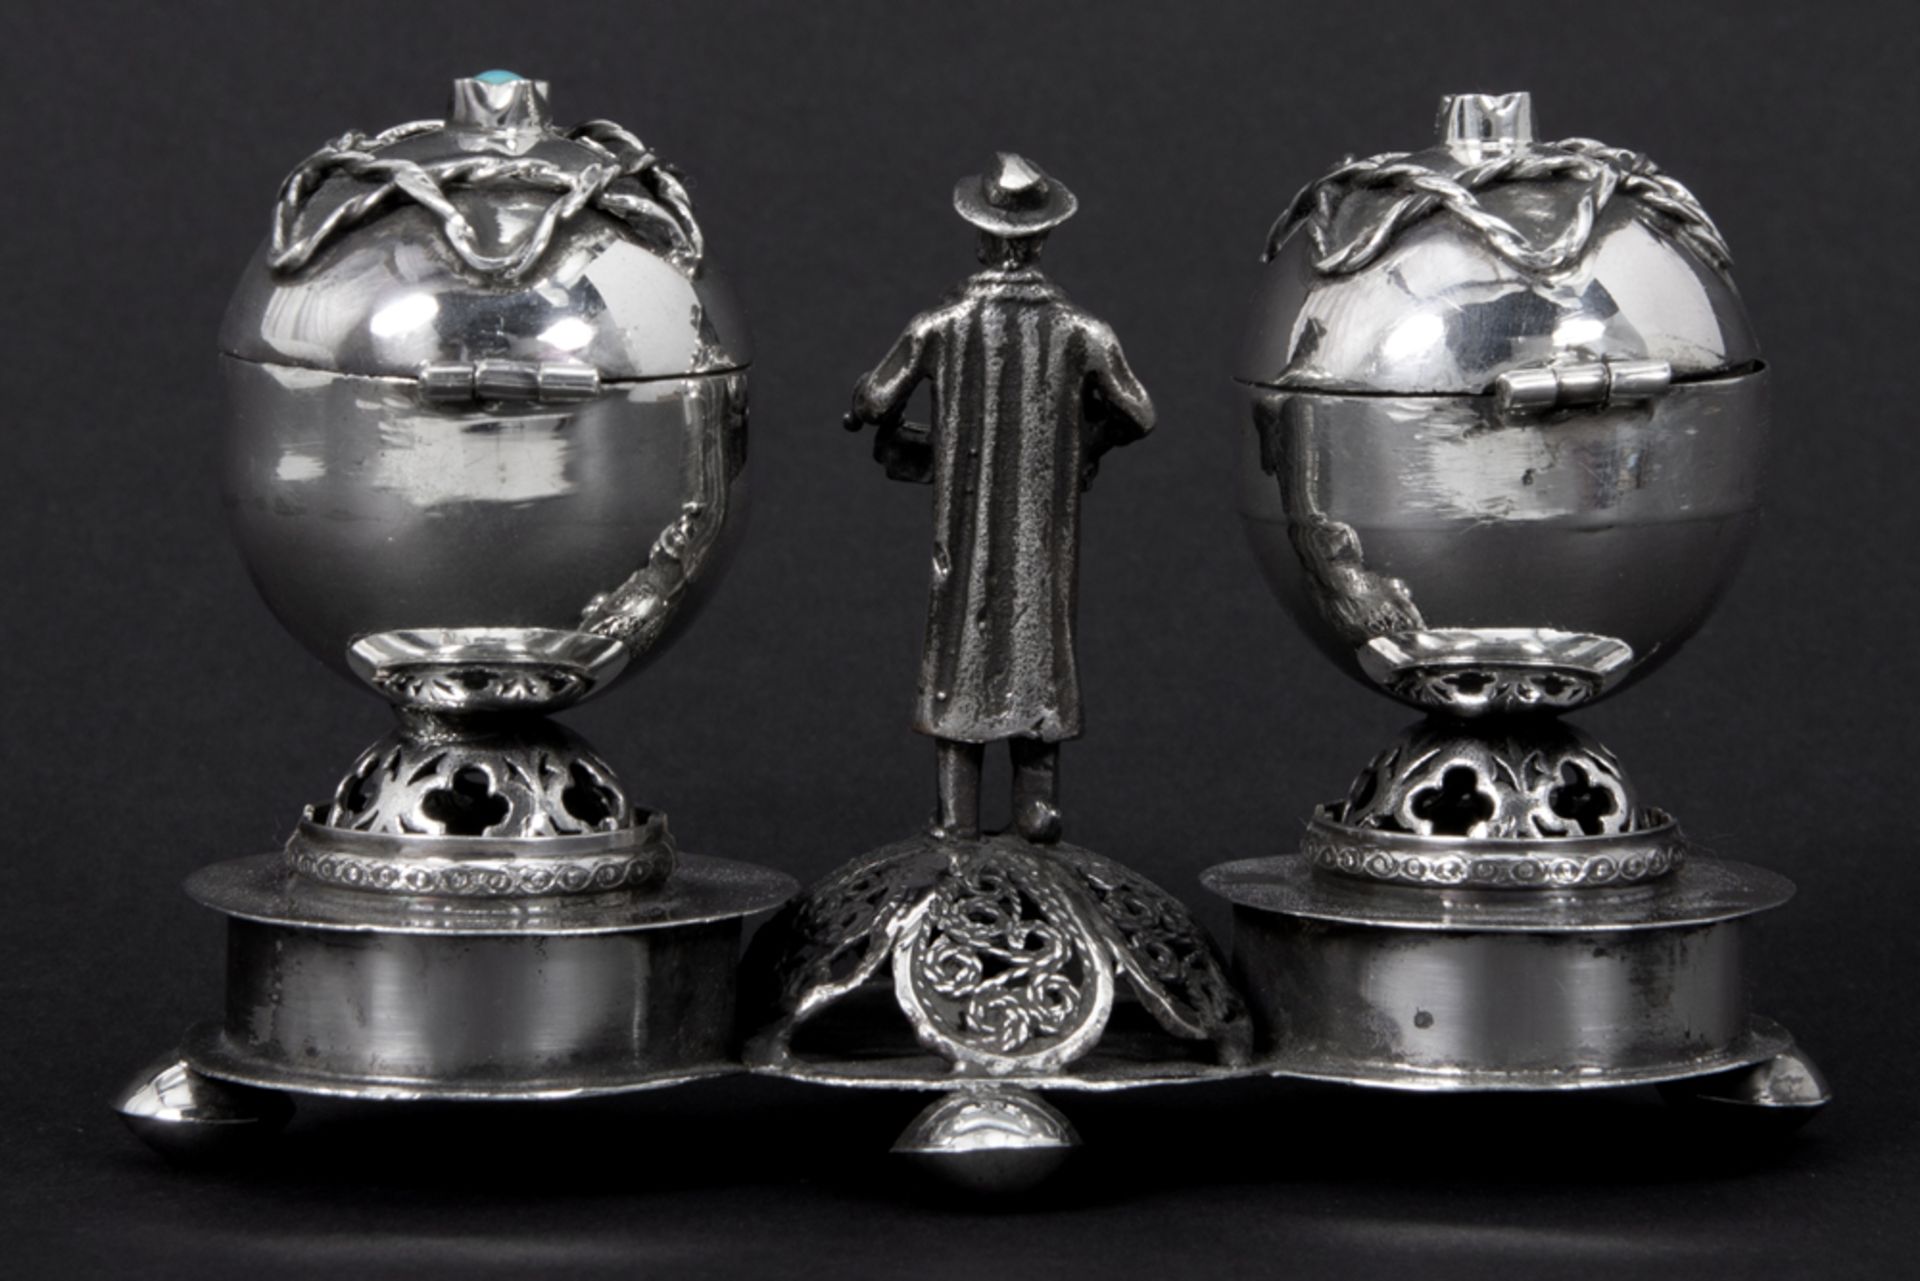 antique Polish salt cellar with two ovoid containers and a standing male figure - in "Warshau 84" - Bild 3 aus 6